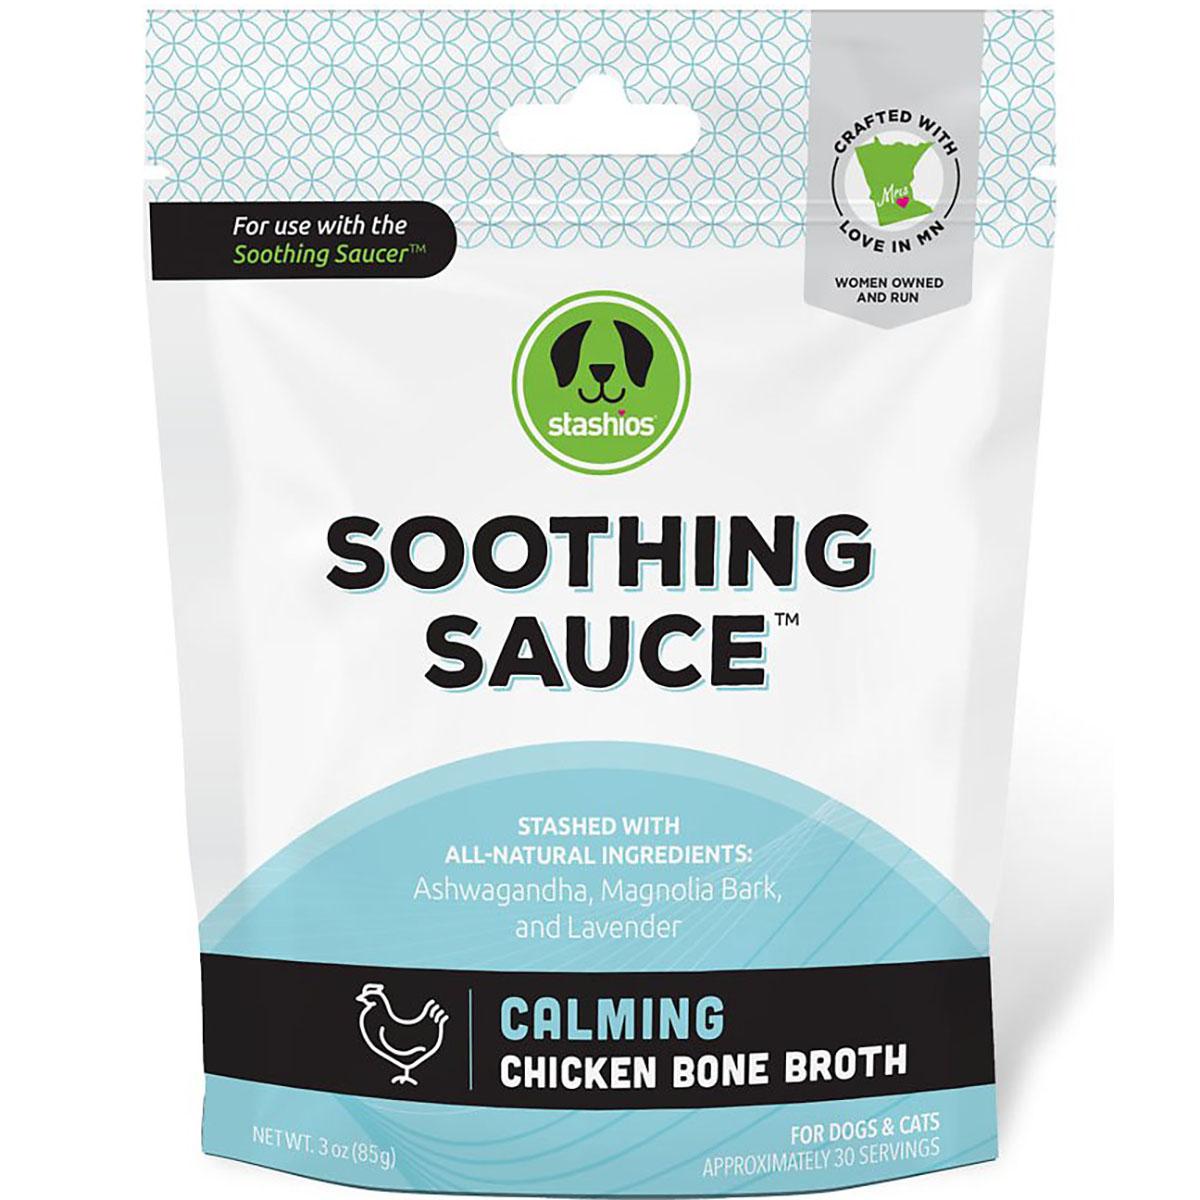 Stashios Soothing Sauce Calming Chicken Bone Broth for Dogs & Cats